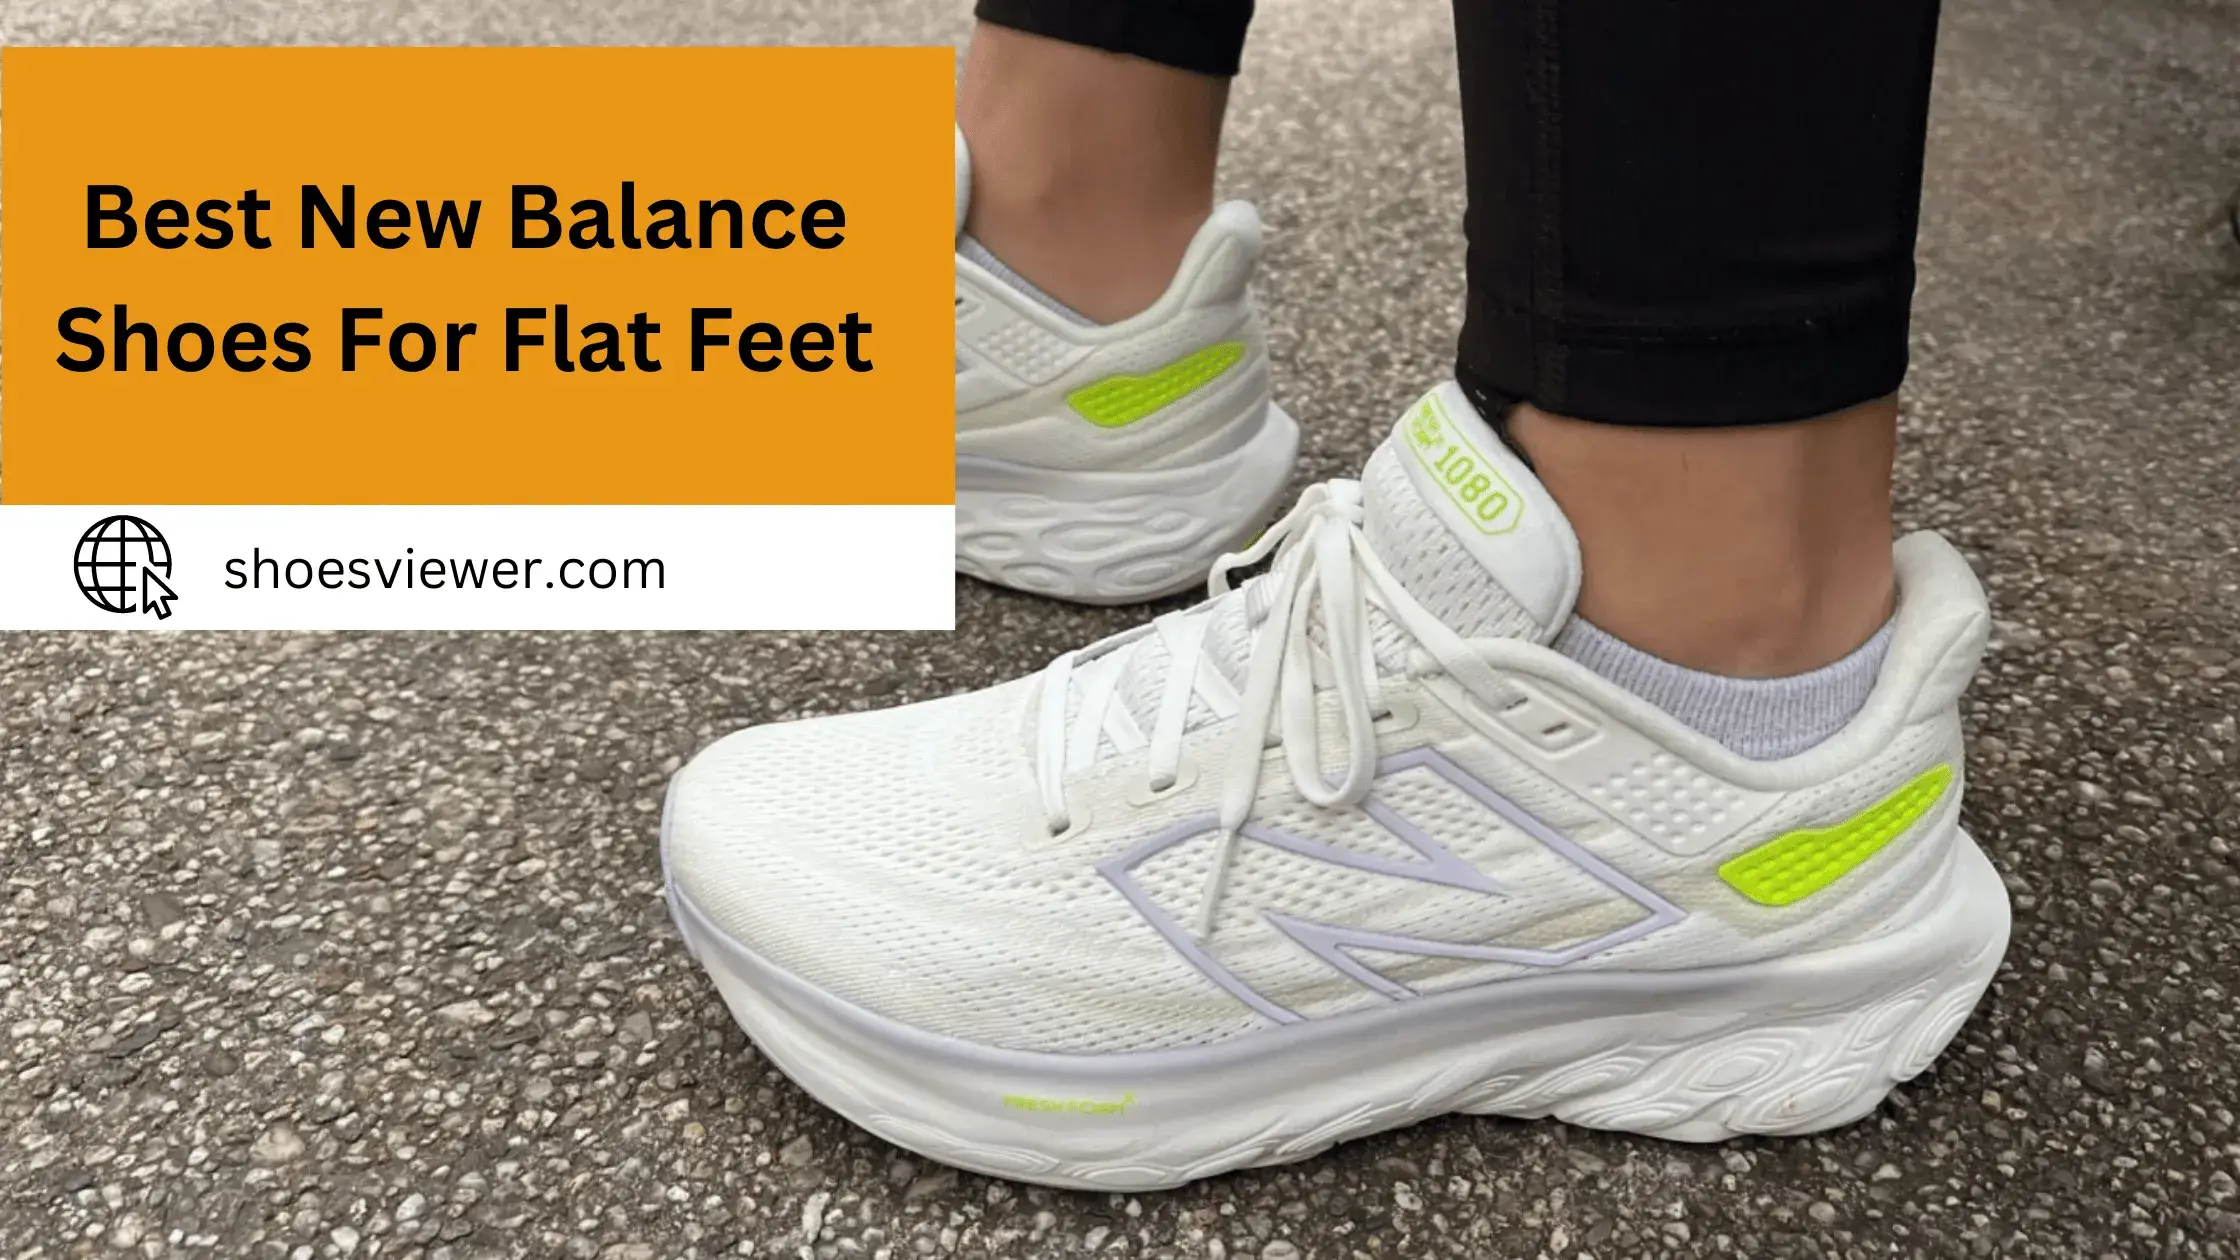 Best New Balance Shoes For Flat Feet - Latest Guide